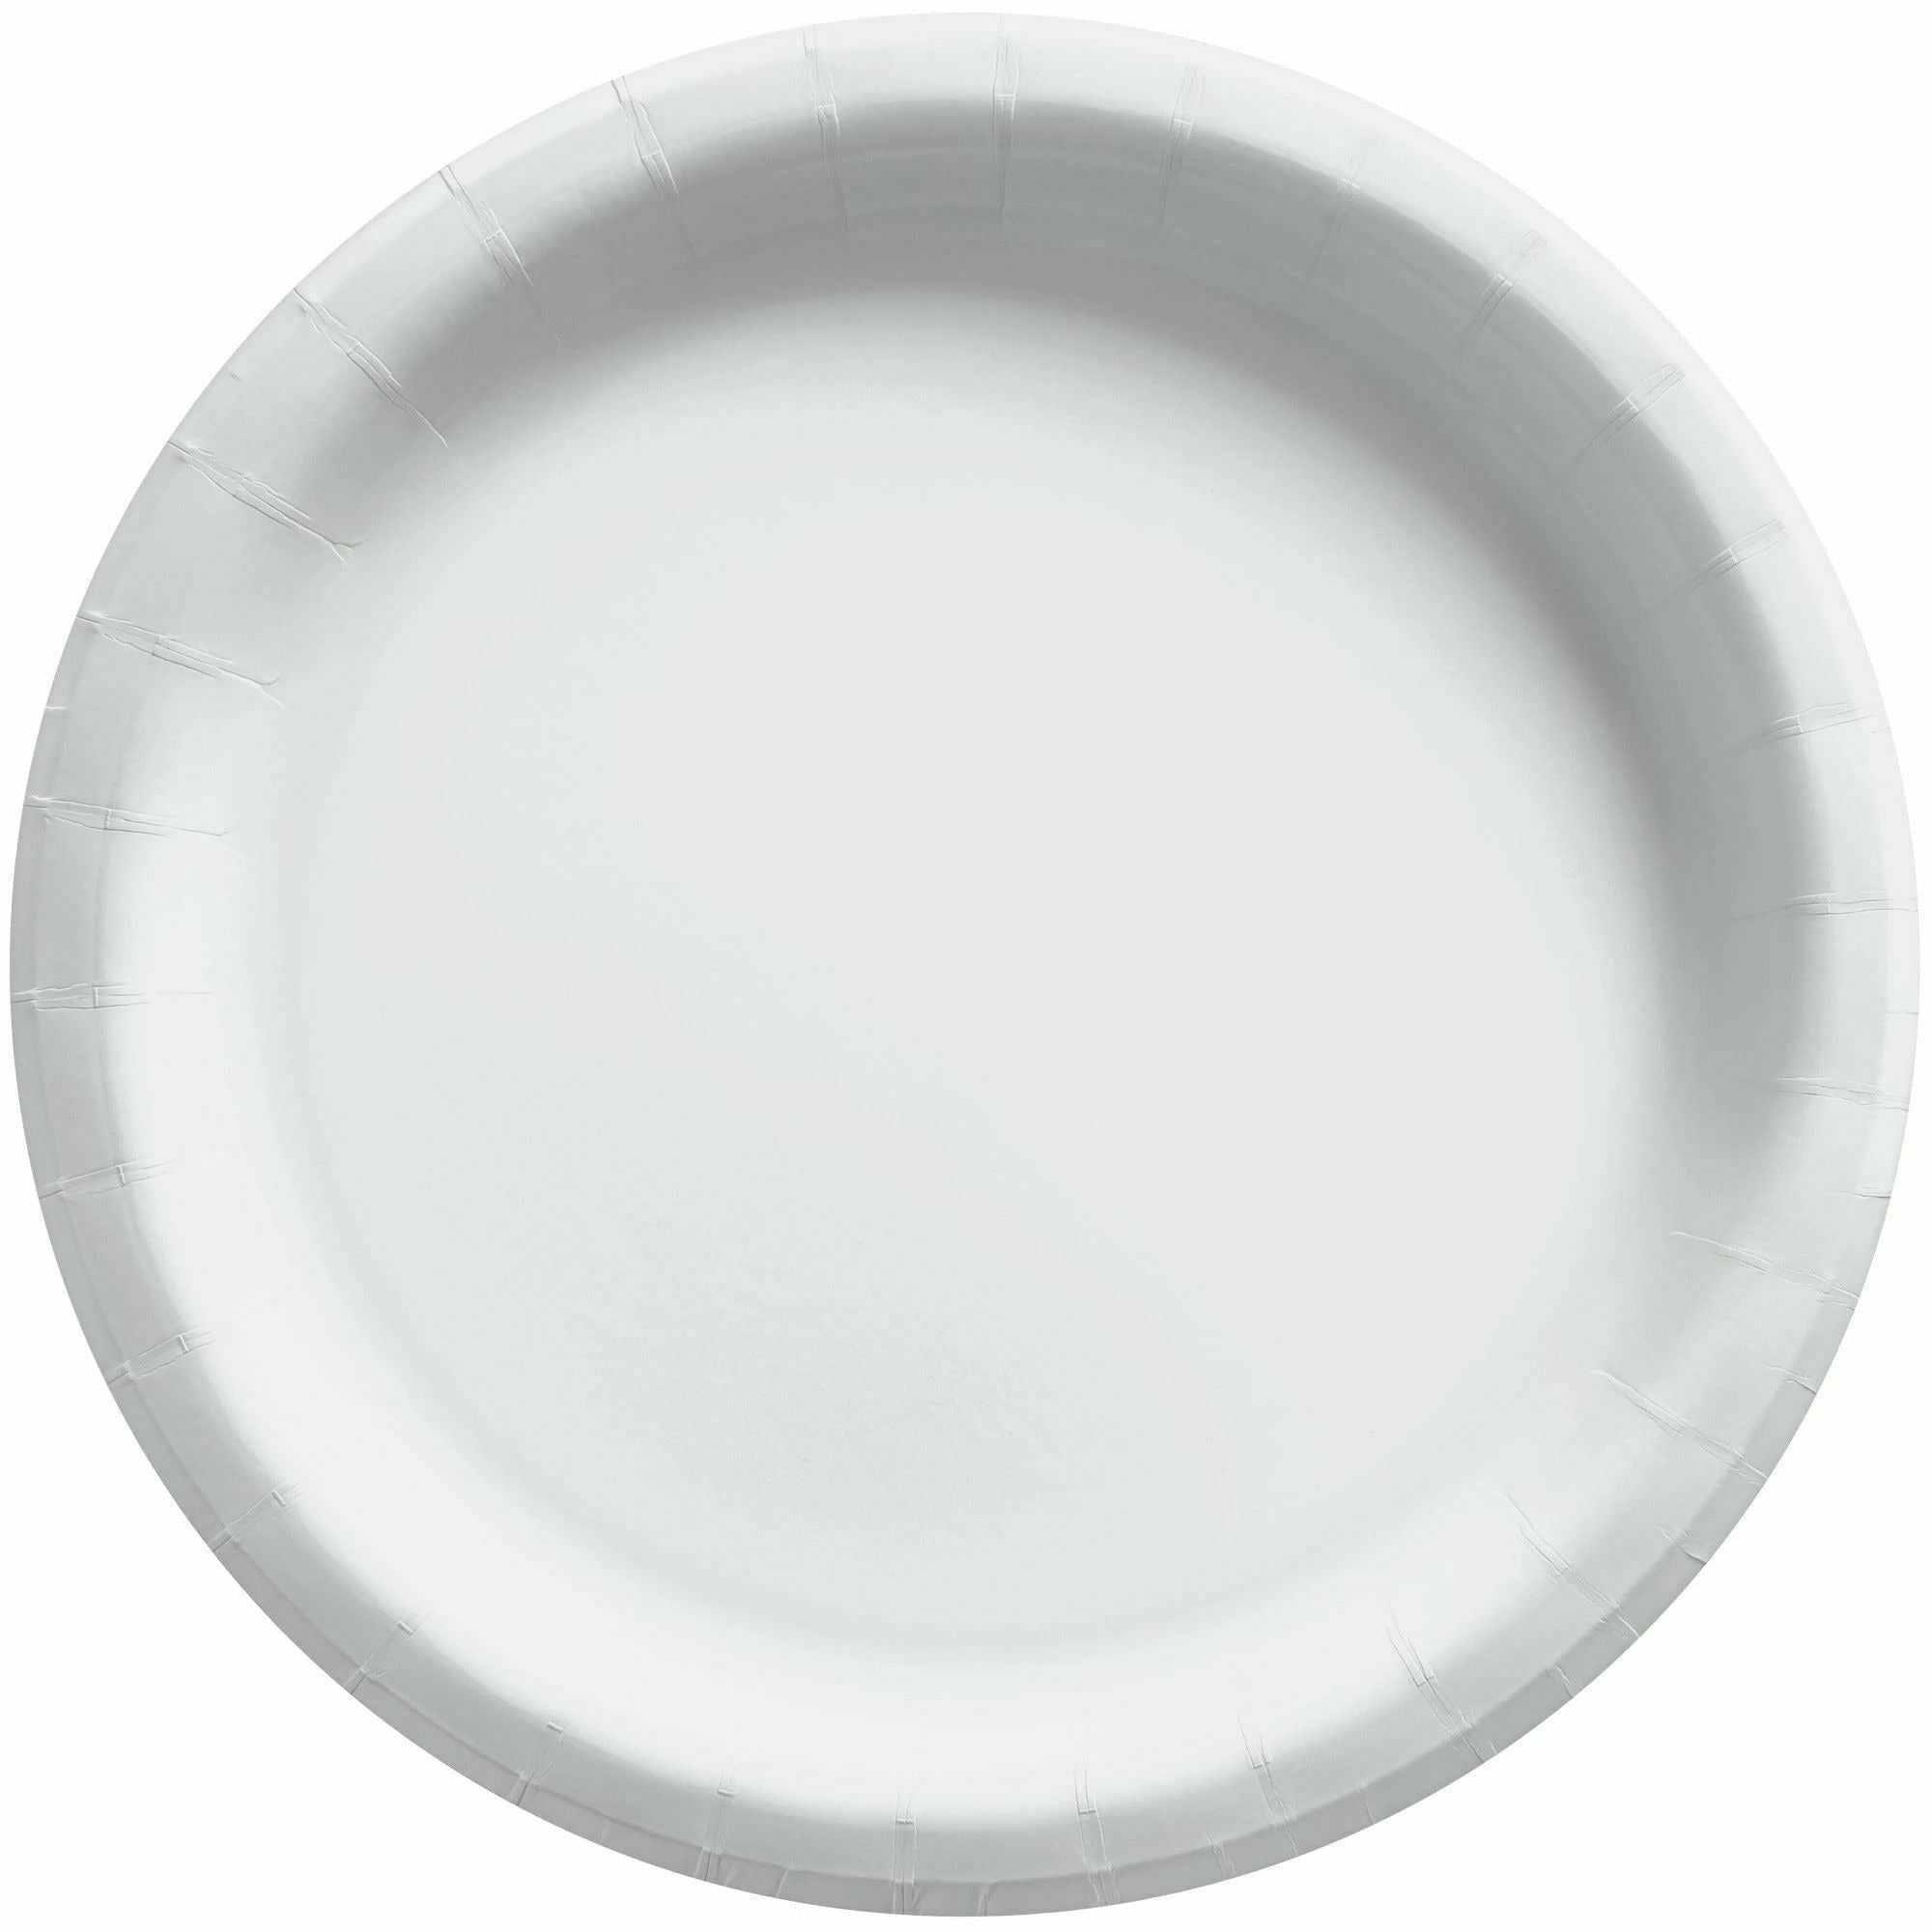 Amscan BASIC Frosty White - 6 3/4" Round Paper Plates, 50 Ct.